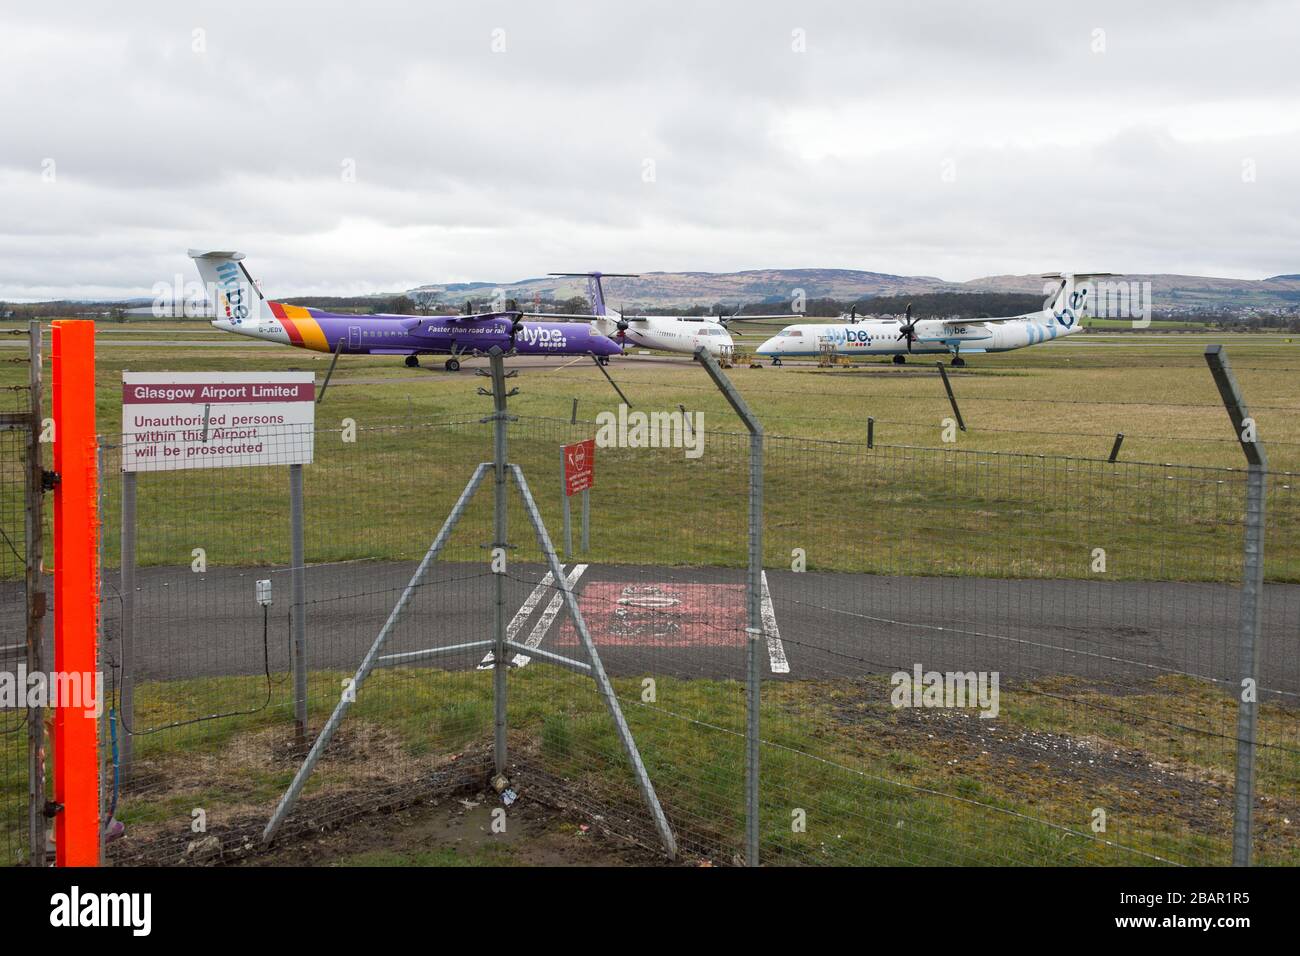 Glasgow, UK. 27 March 2020. Pictured: Grounded Flybe De Havilland Canada Dash 8 Q400 Aircraft seen parked up on the tarmac by the Emergency Rendezvous point at Glasgow Airport.  The Coronavirus Pandemic has been responsible for the UK shutdown aviation bringing Glasgow Airport to look more like a ghost town. Credit: Colin Fisher/Alamy Live News. Stock Photo